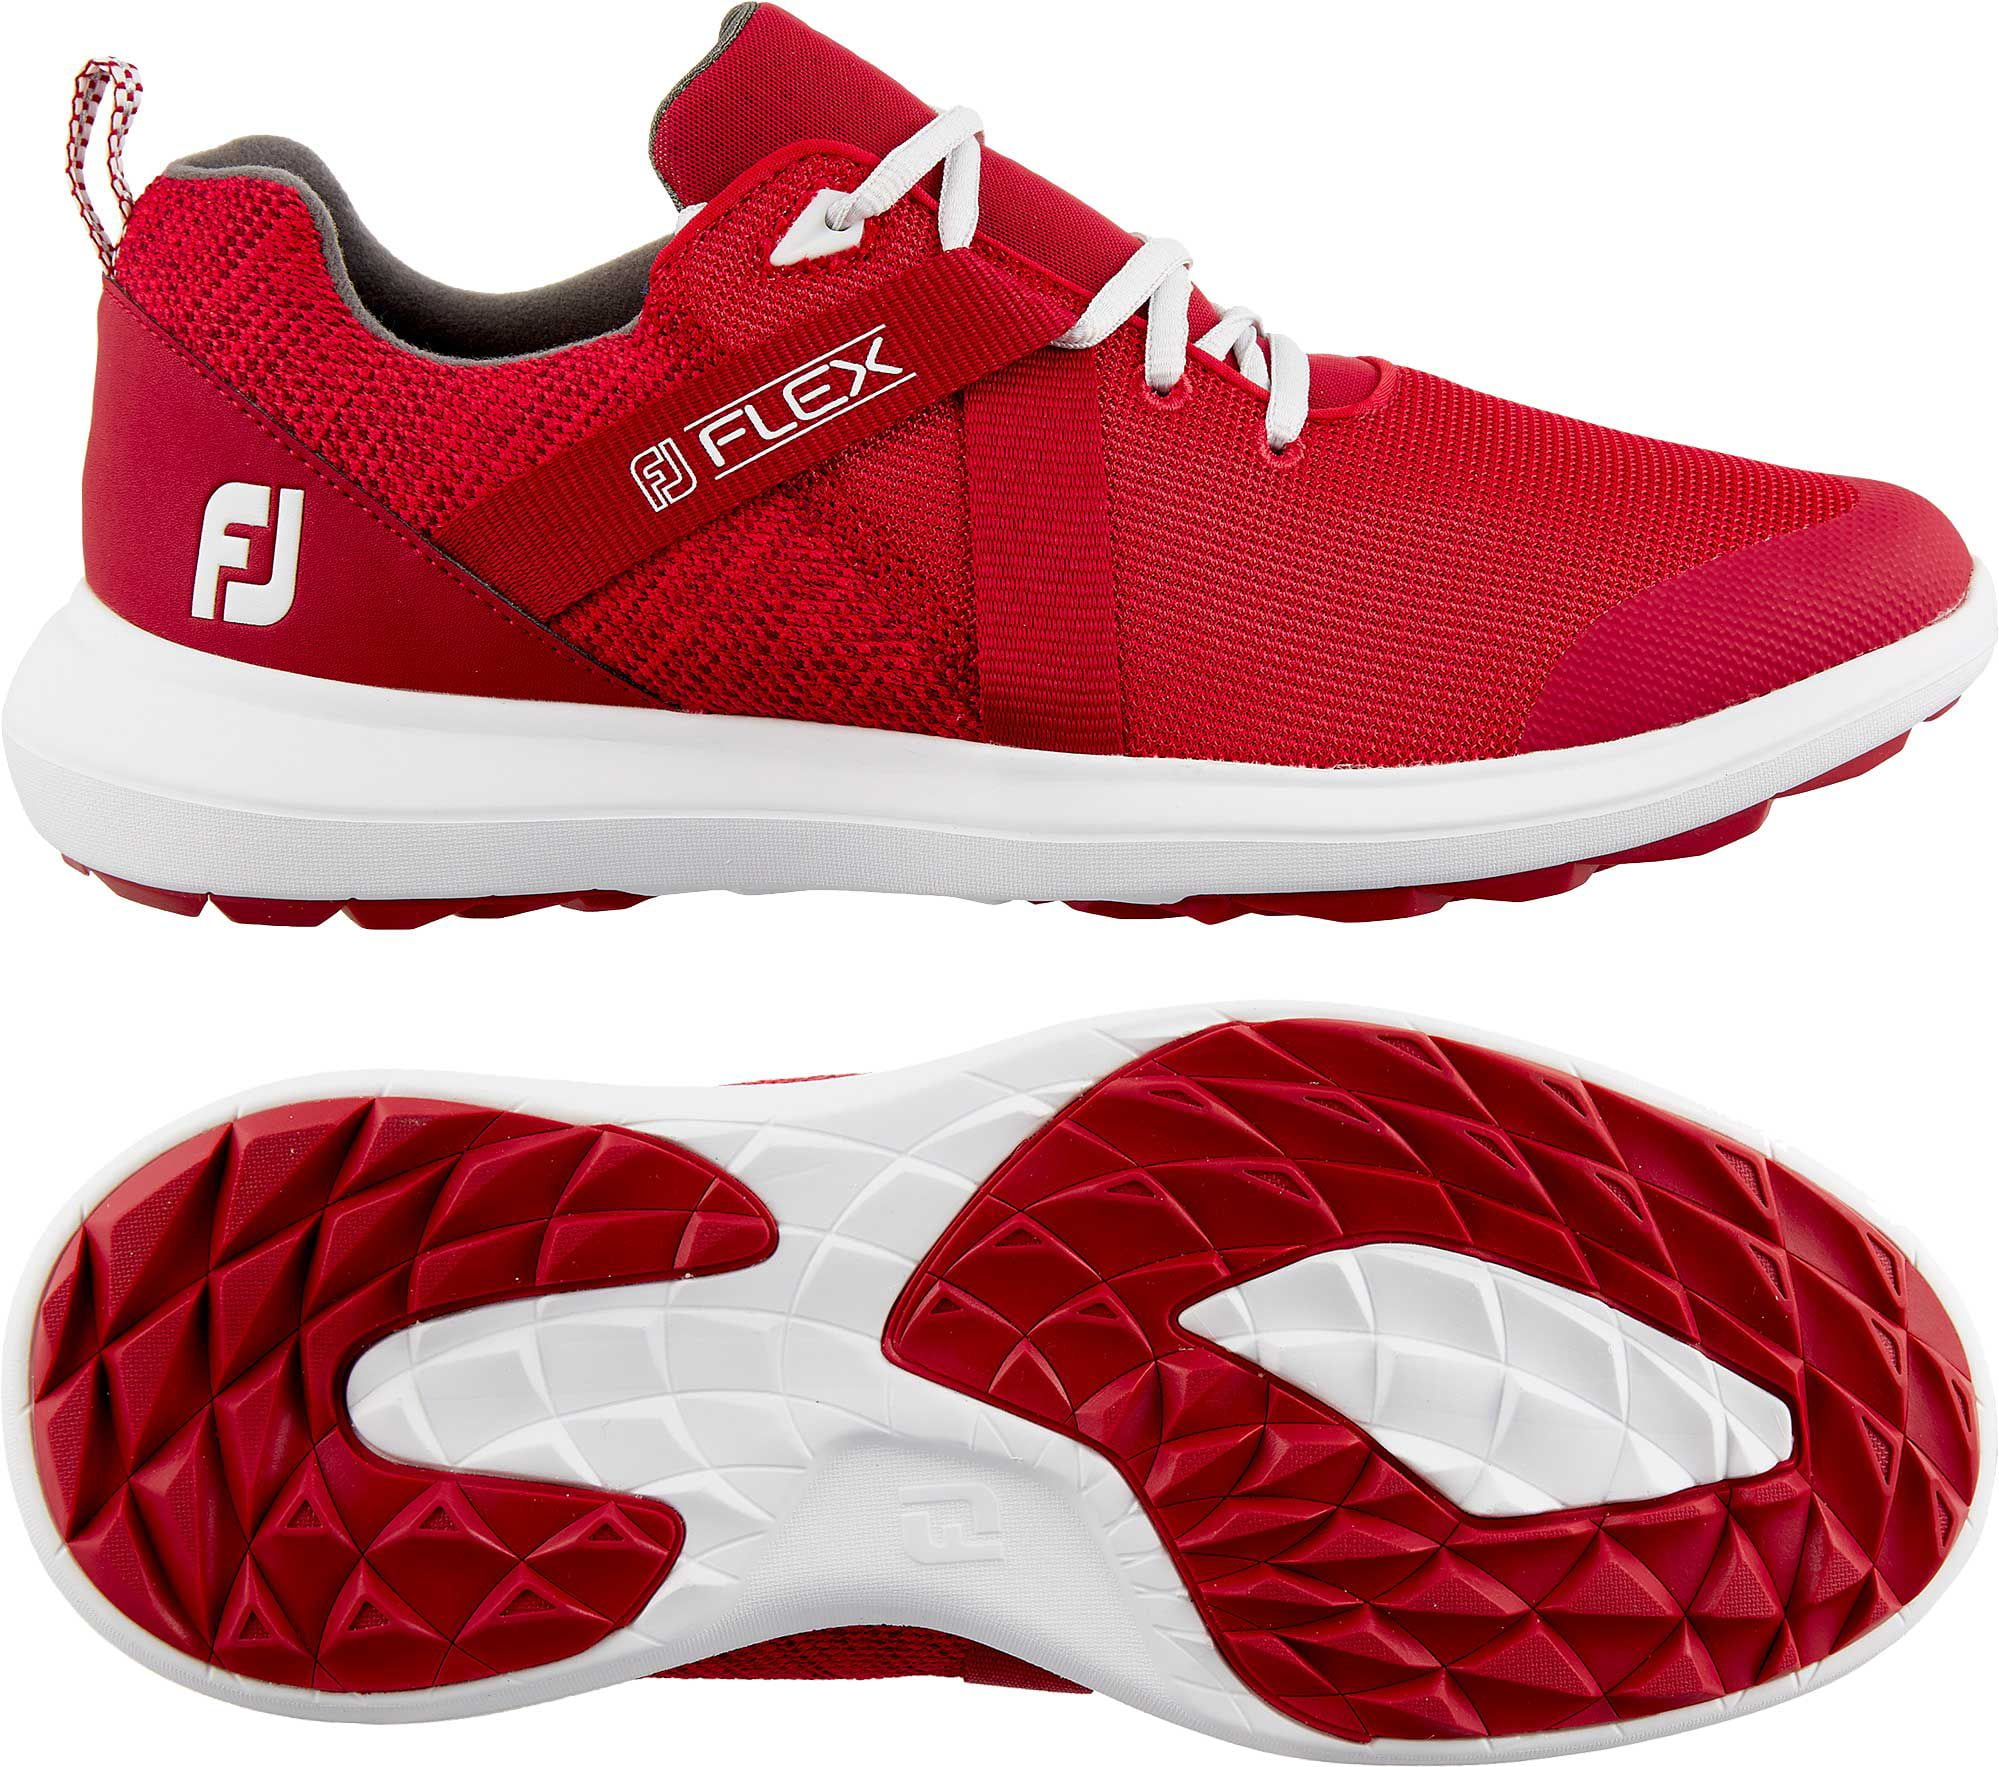 Where to buy on sale footjoy flex golf shoes?